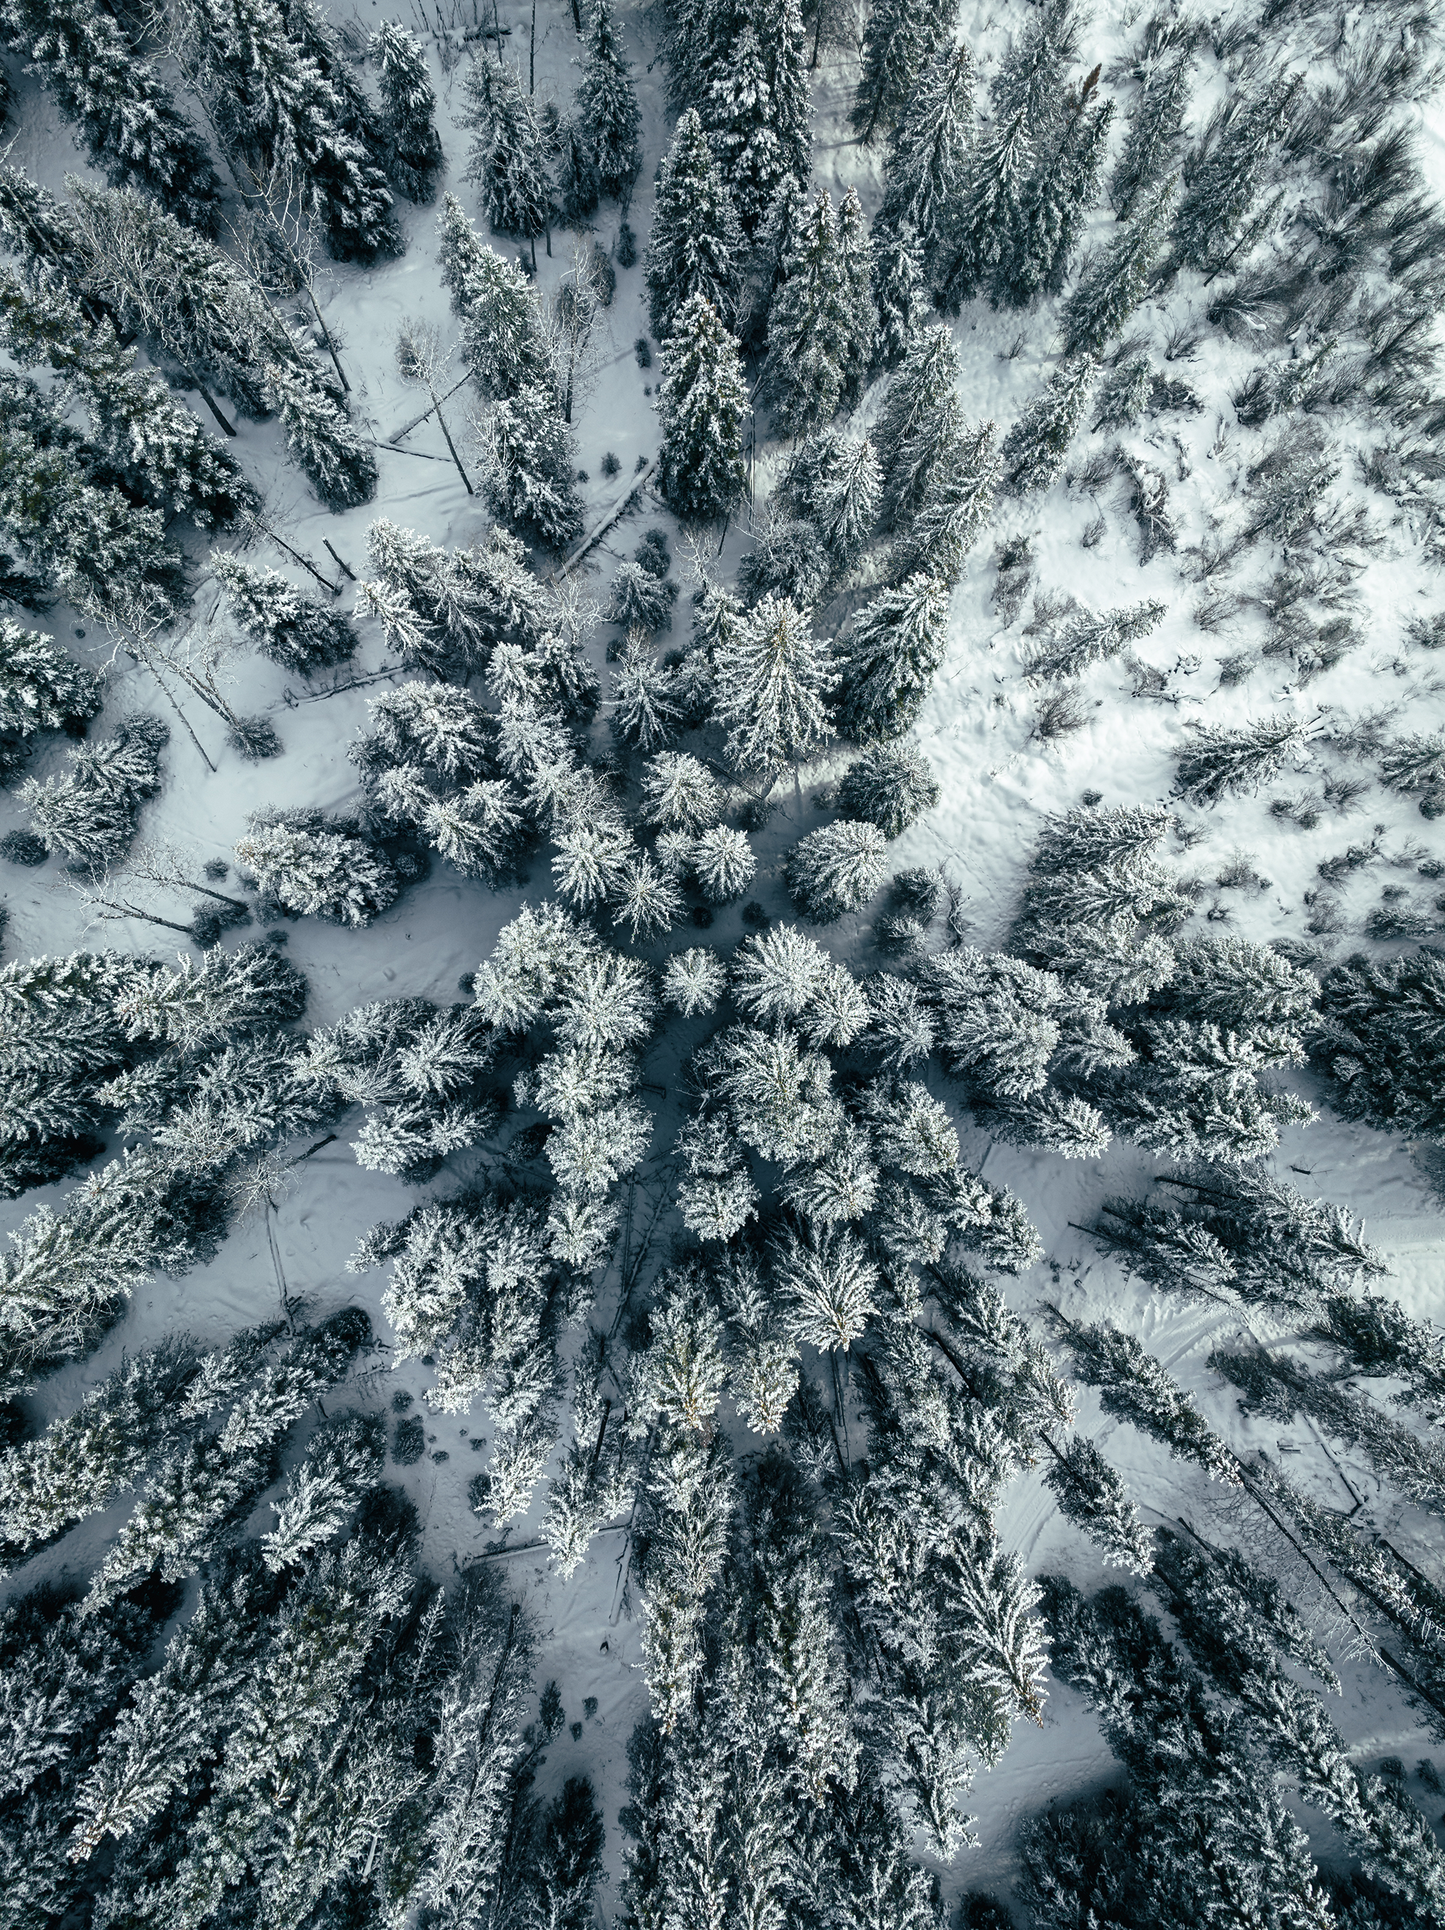 Photograph of snowy treetops in Canada